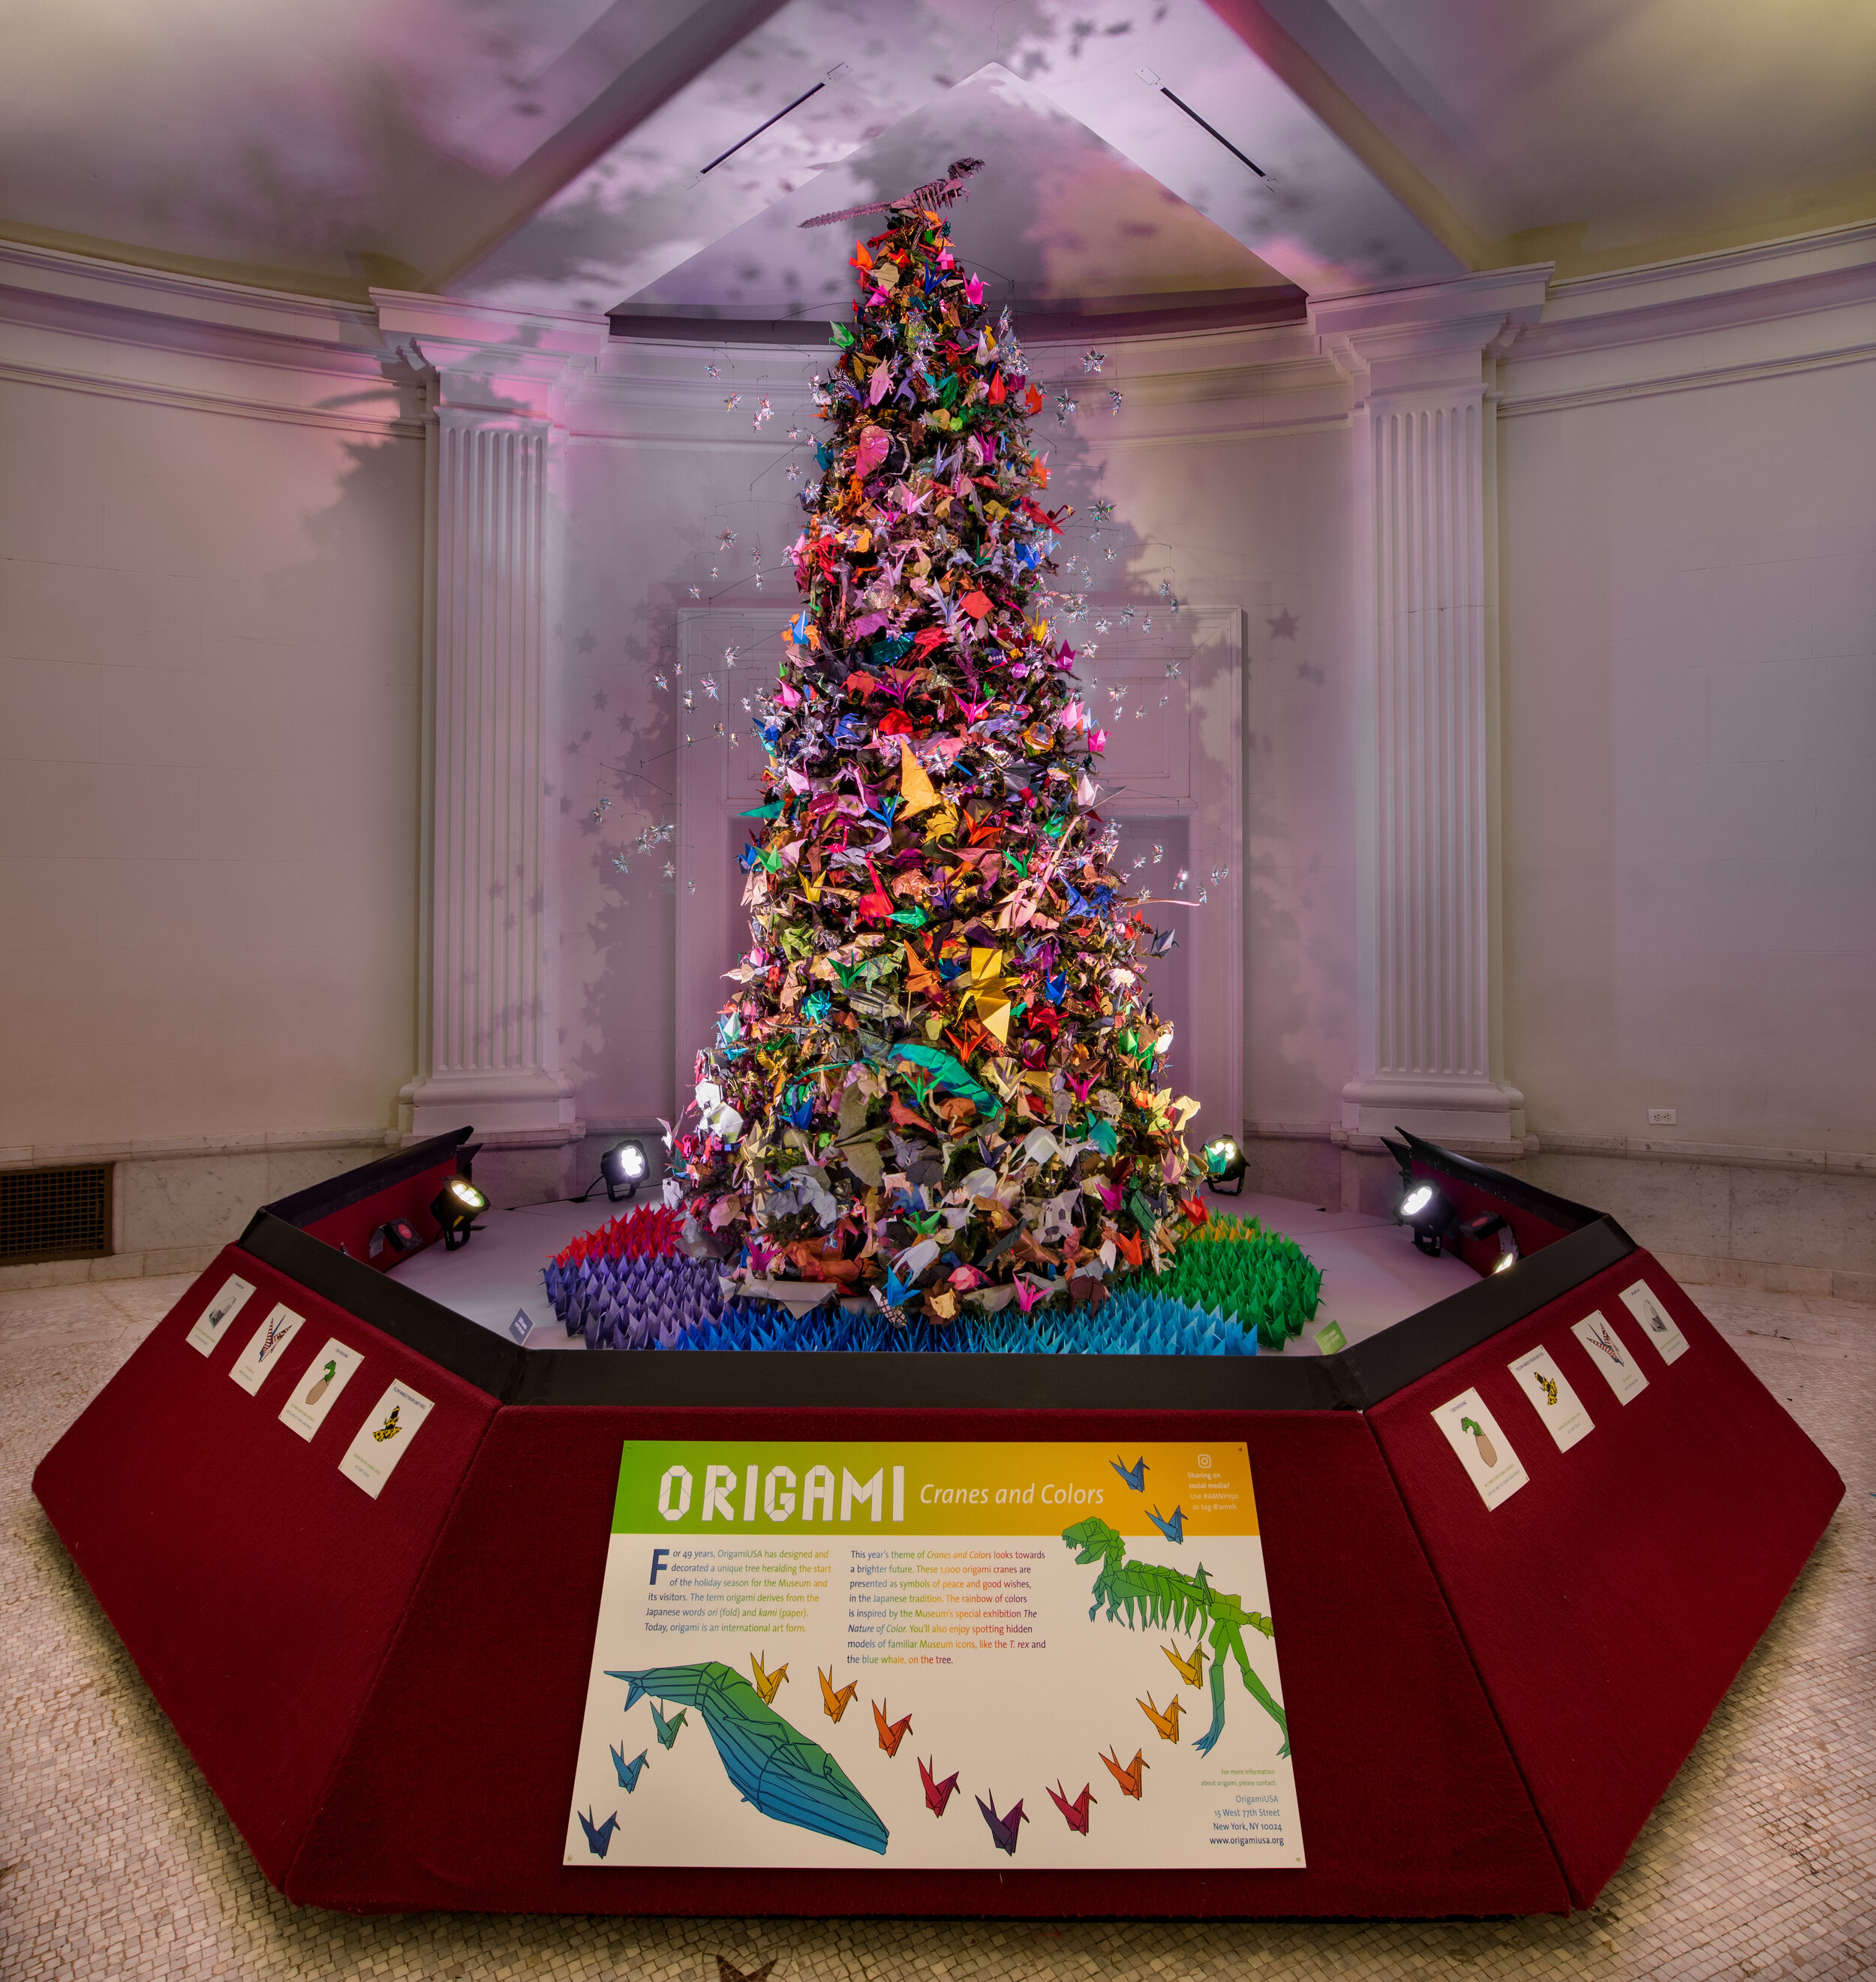 The American Museum of Natural History's "Origami Holiday Tree"